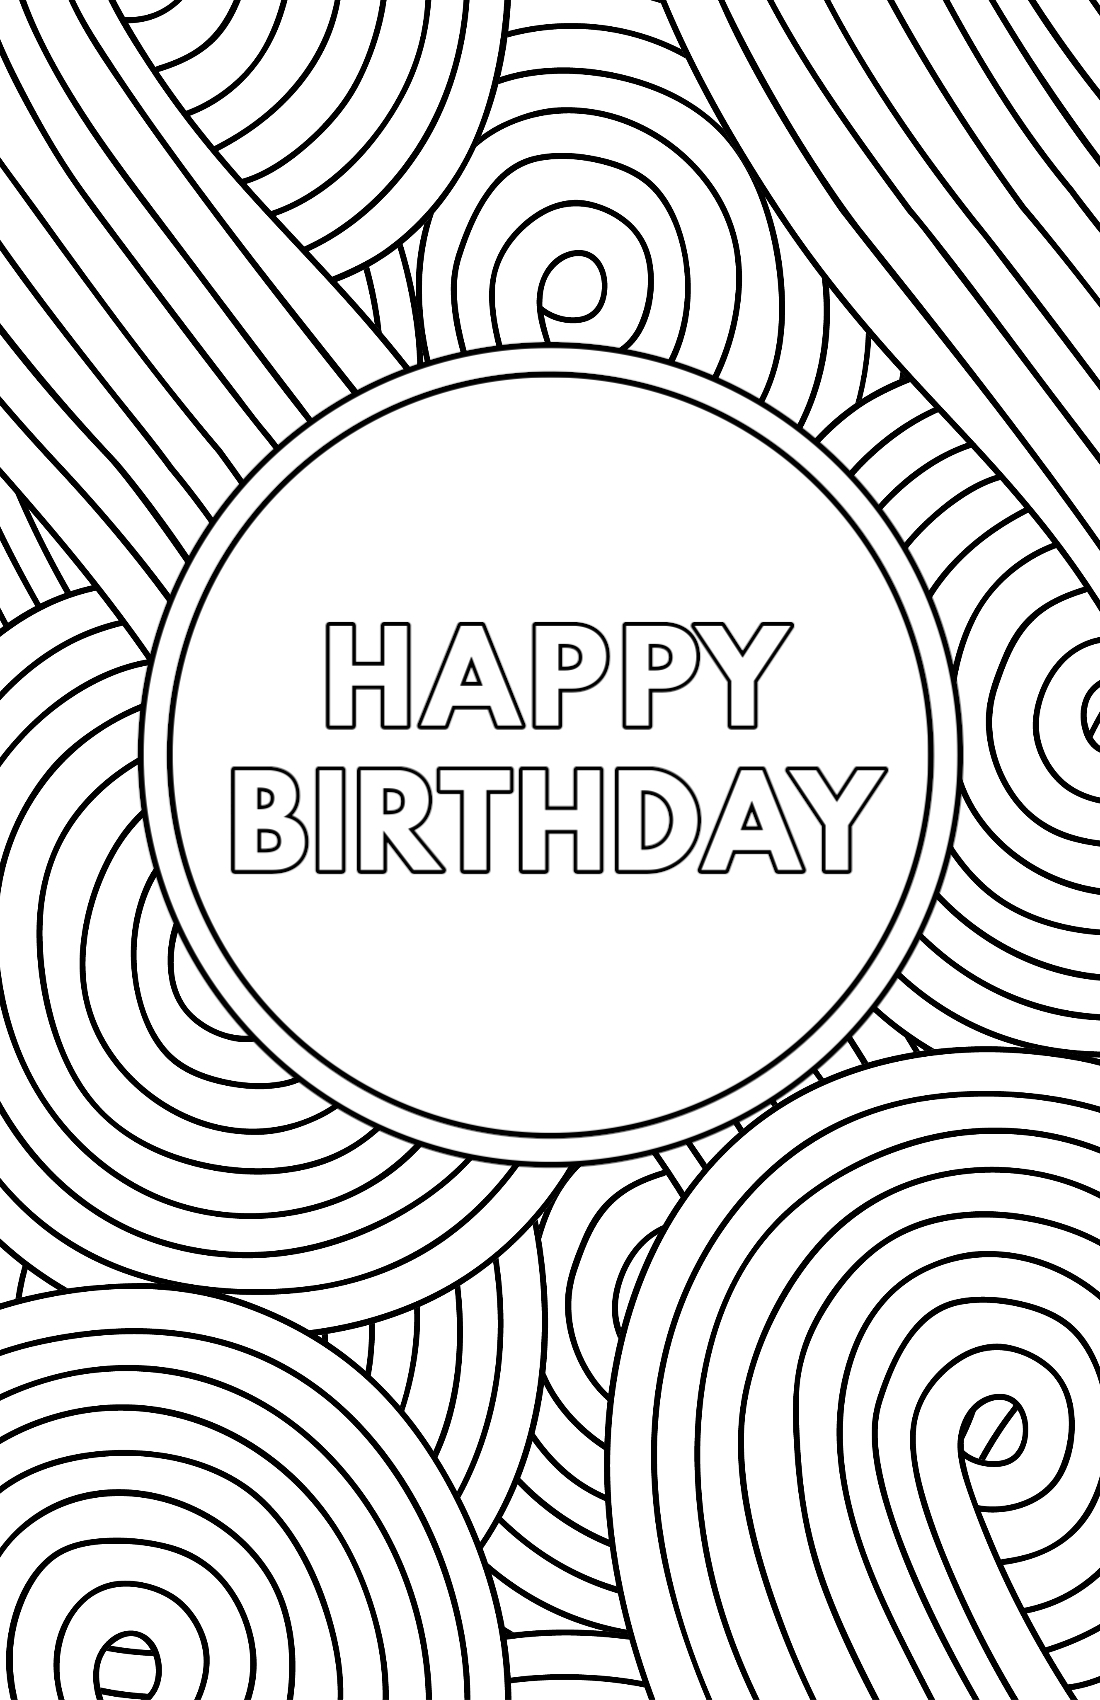 L.O.L. Surprise coloring pages to print - Birthday Wishes Free Printable Birthday Cards To Color